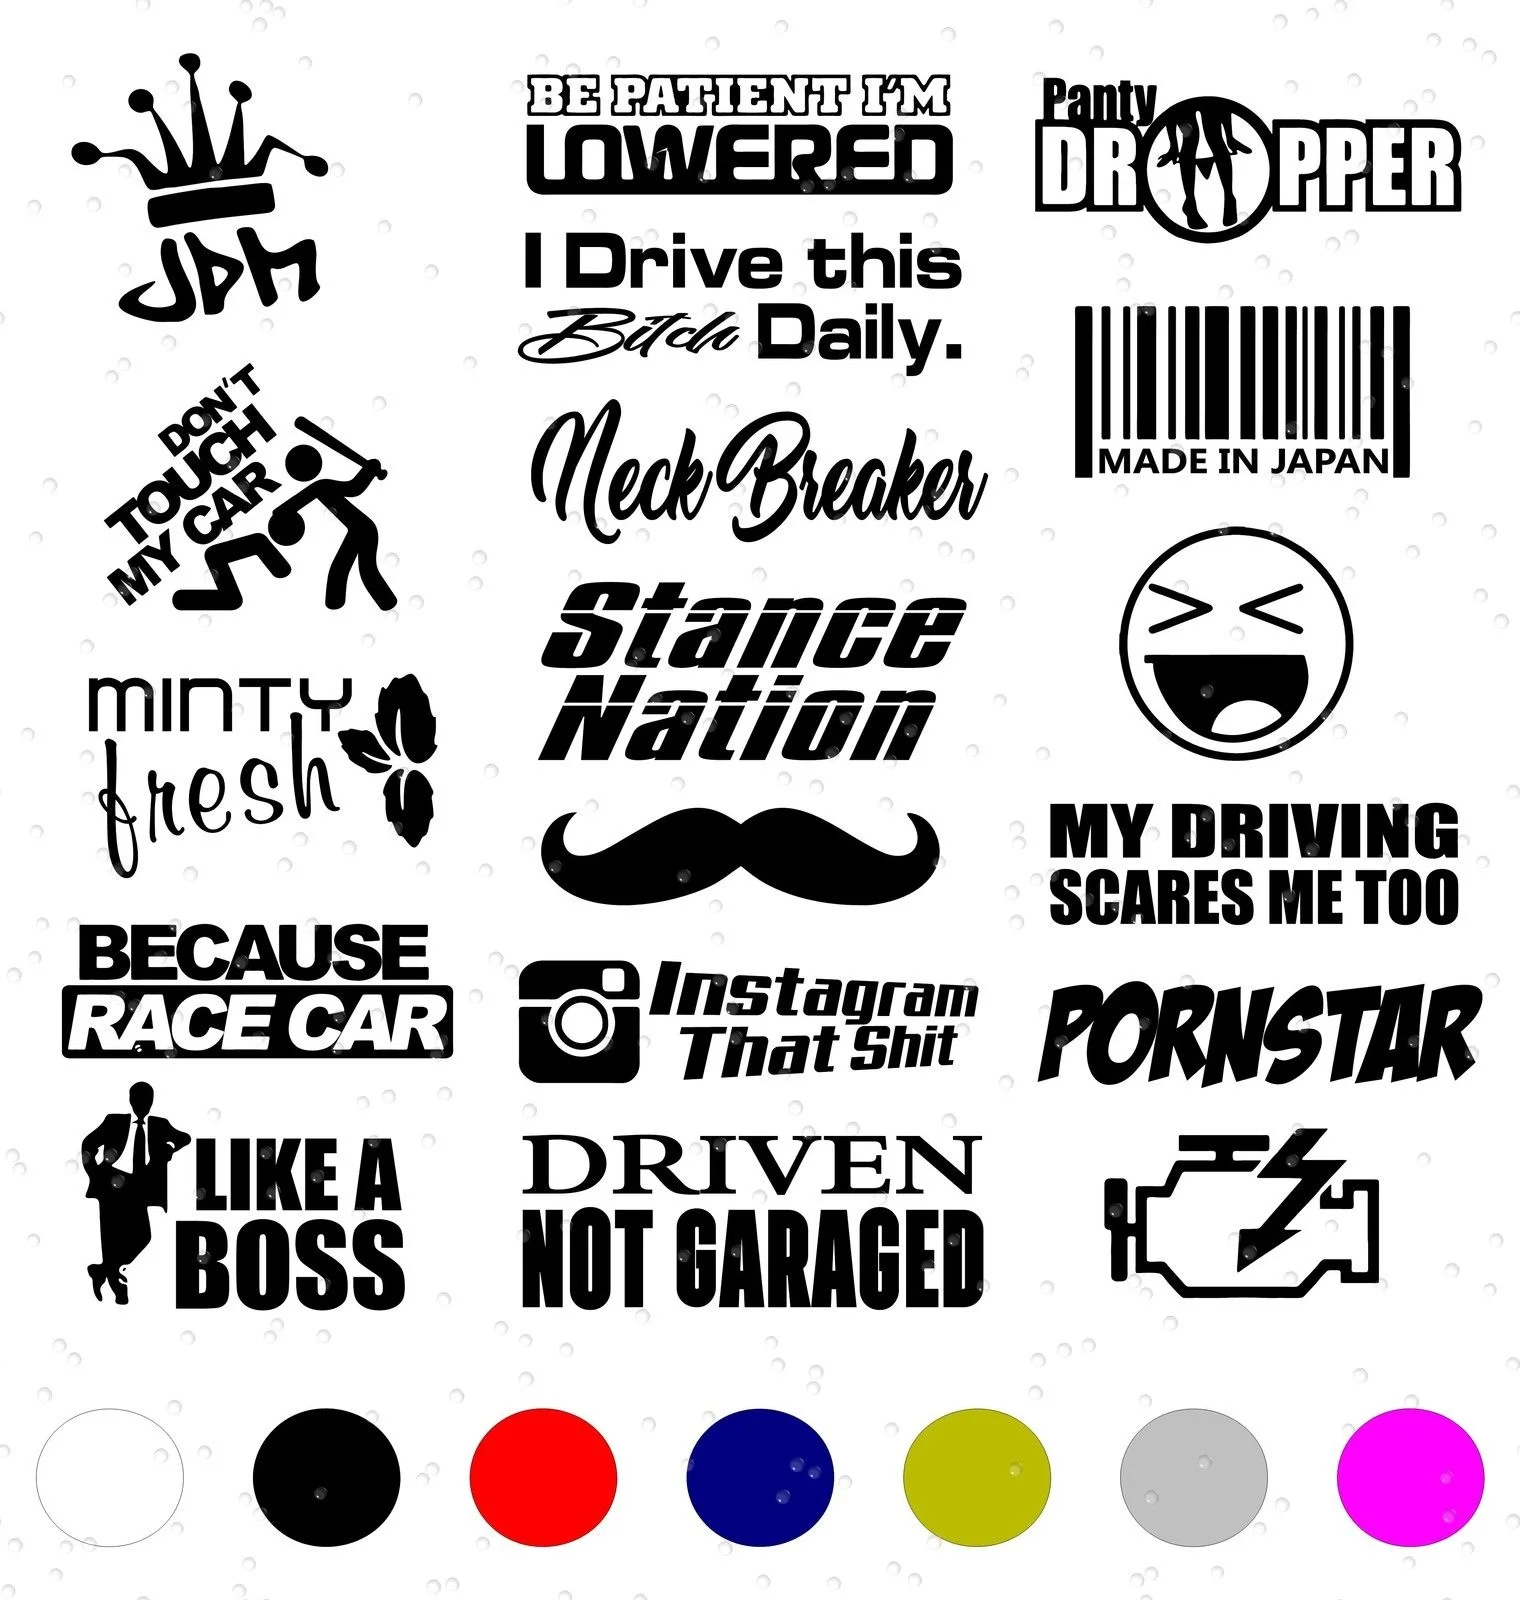 

For 1Set 10 WHITE Random Jdm Car Sticker Decal Pack/Lot Low Euro Racing Boost Drift Funny Styling